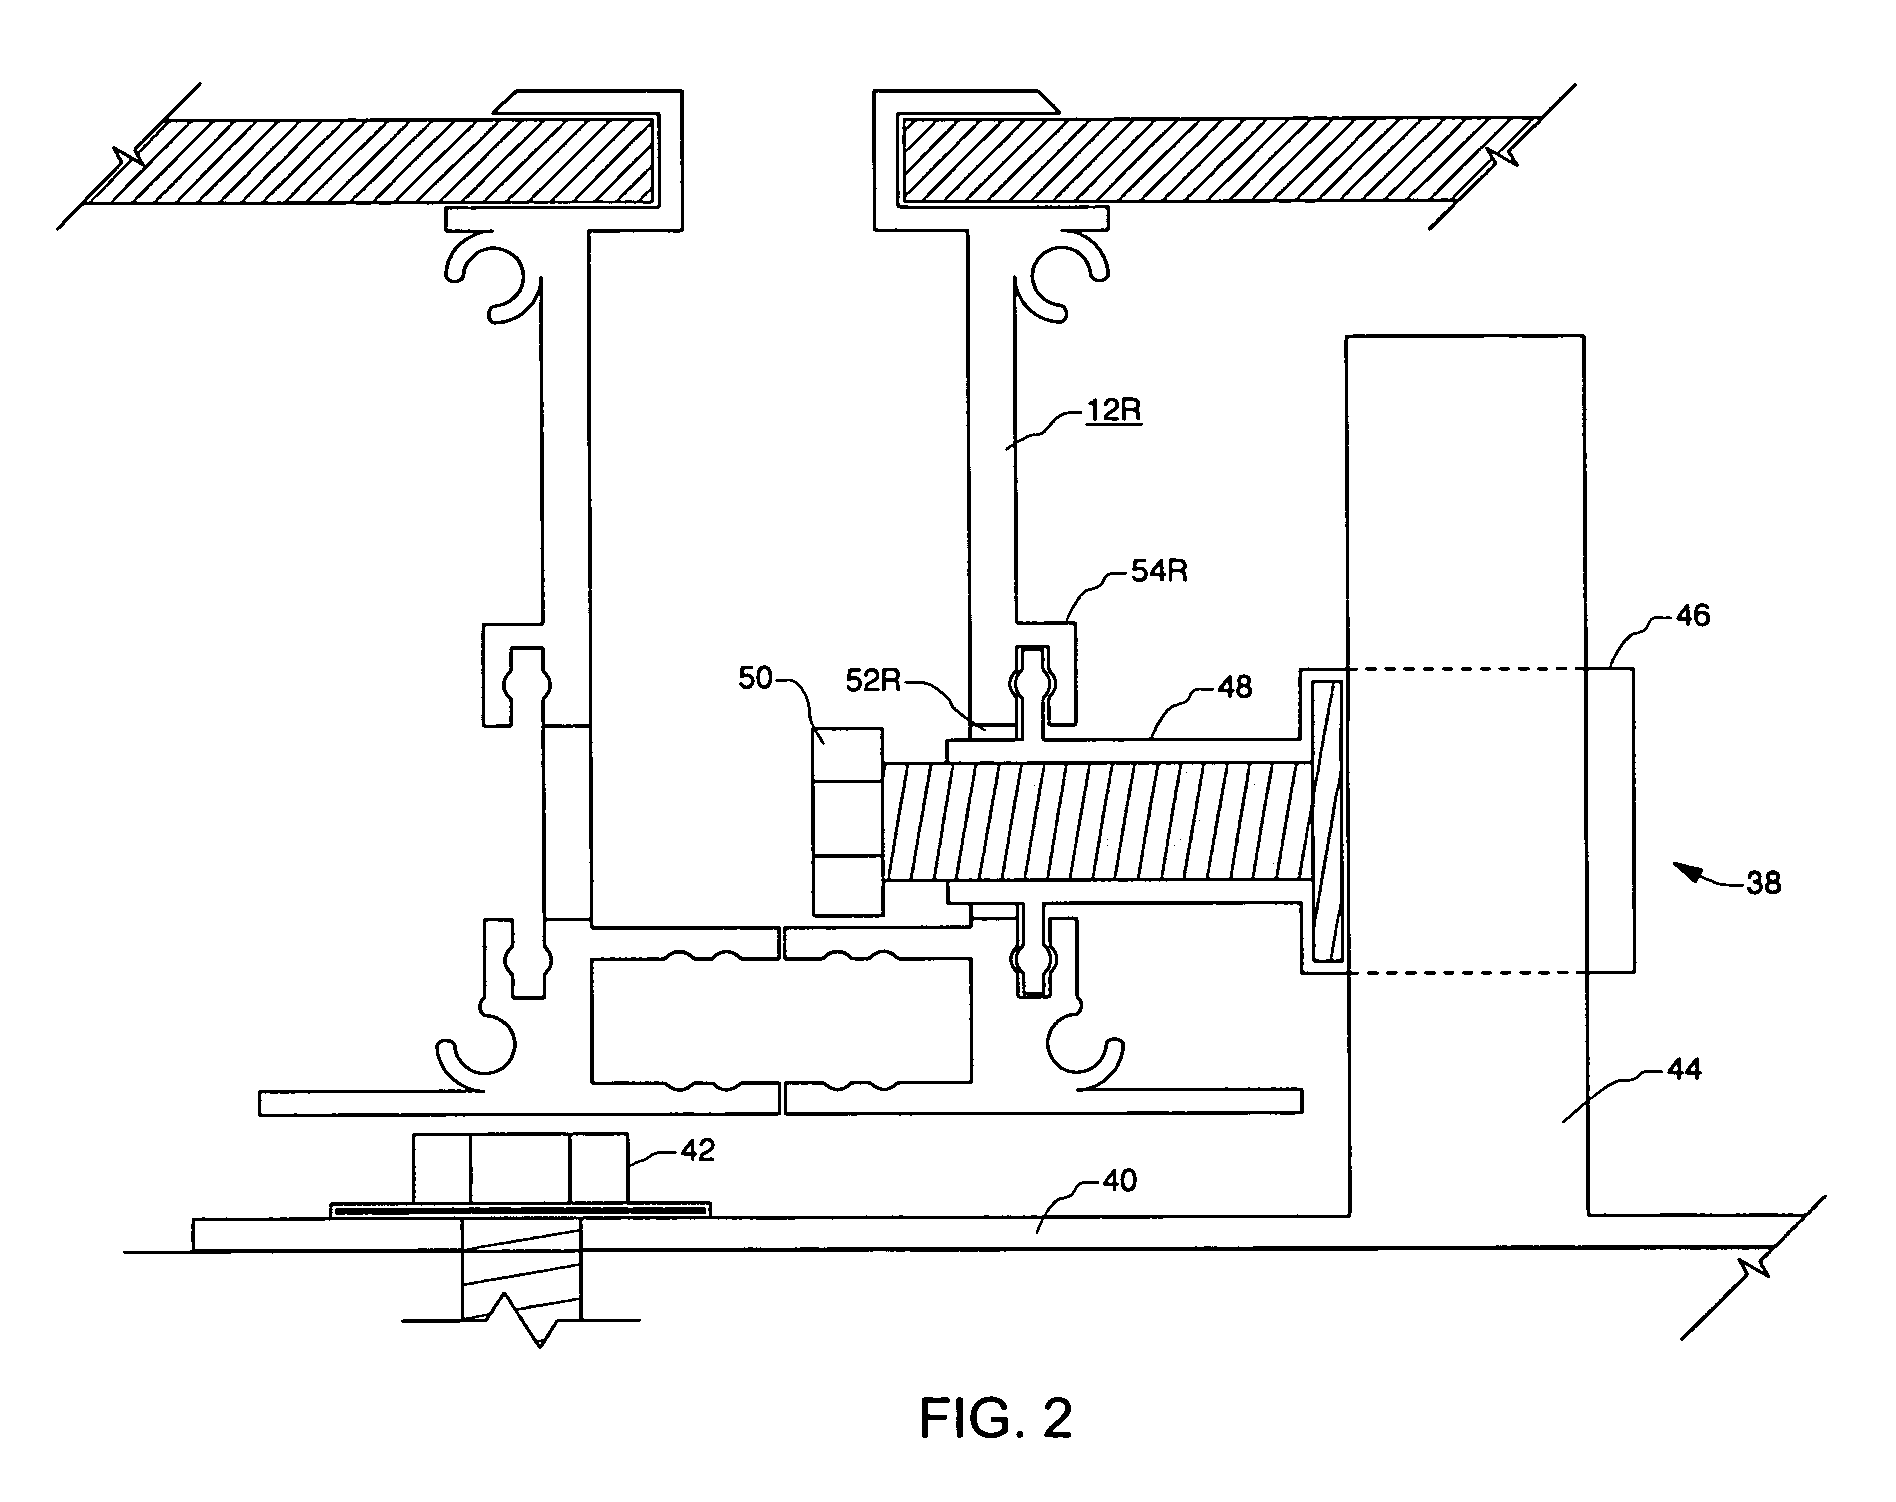 Method and apparatus for mounting photovoltaic modules